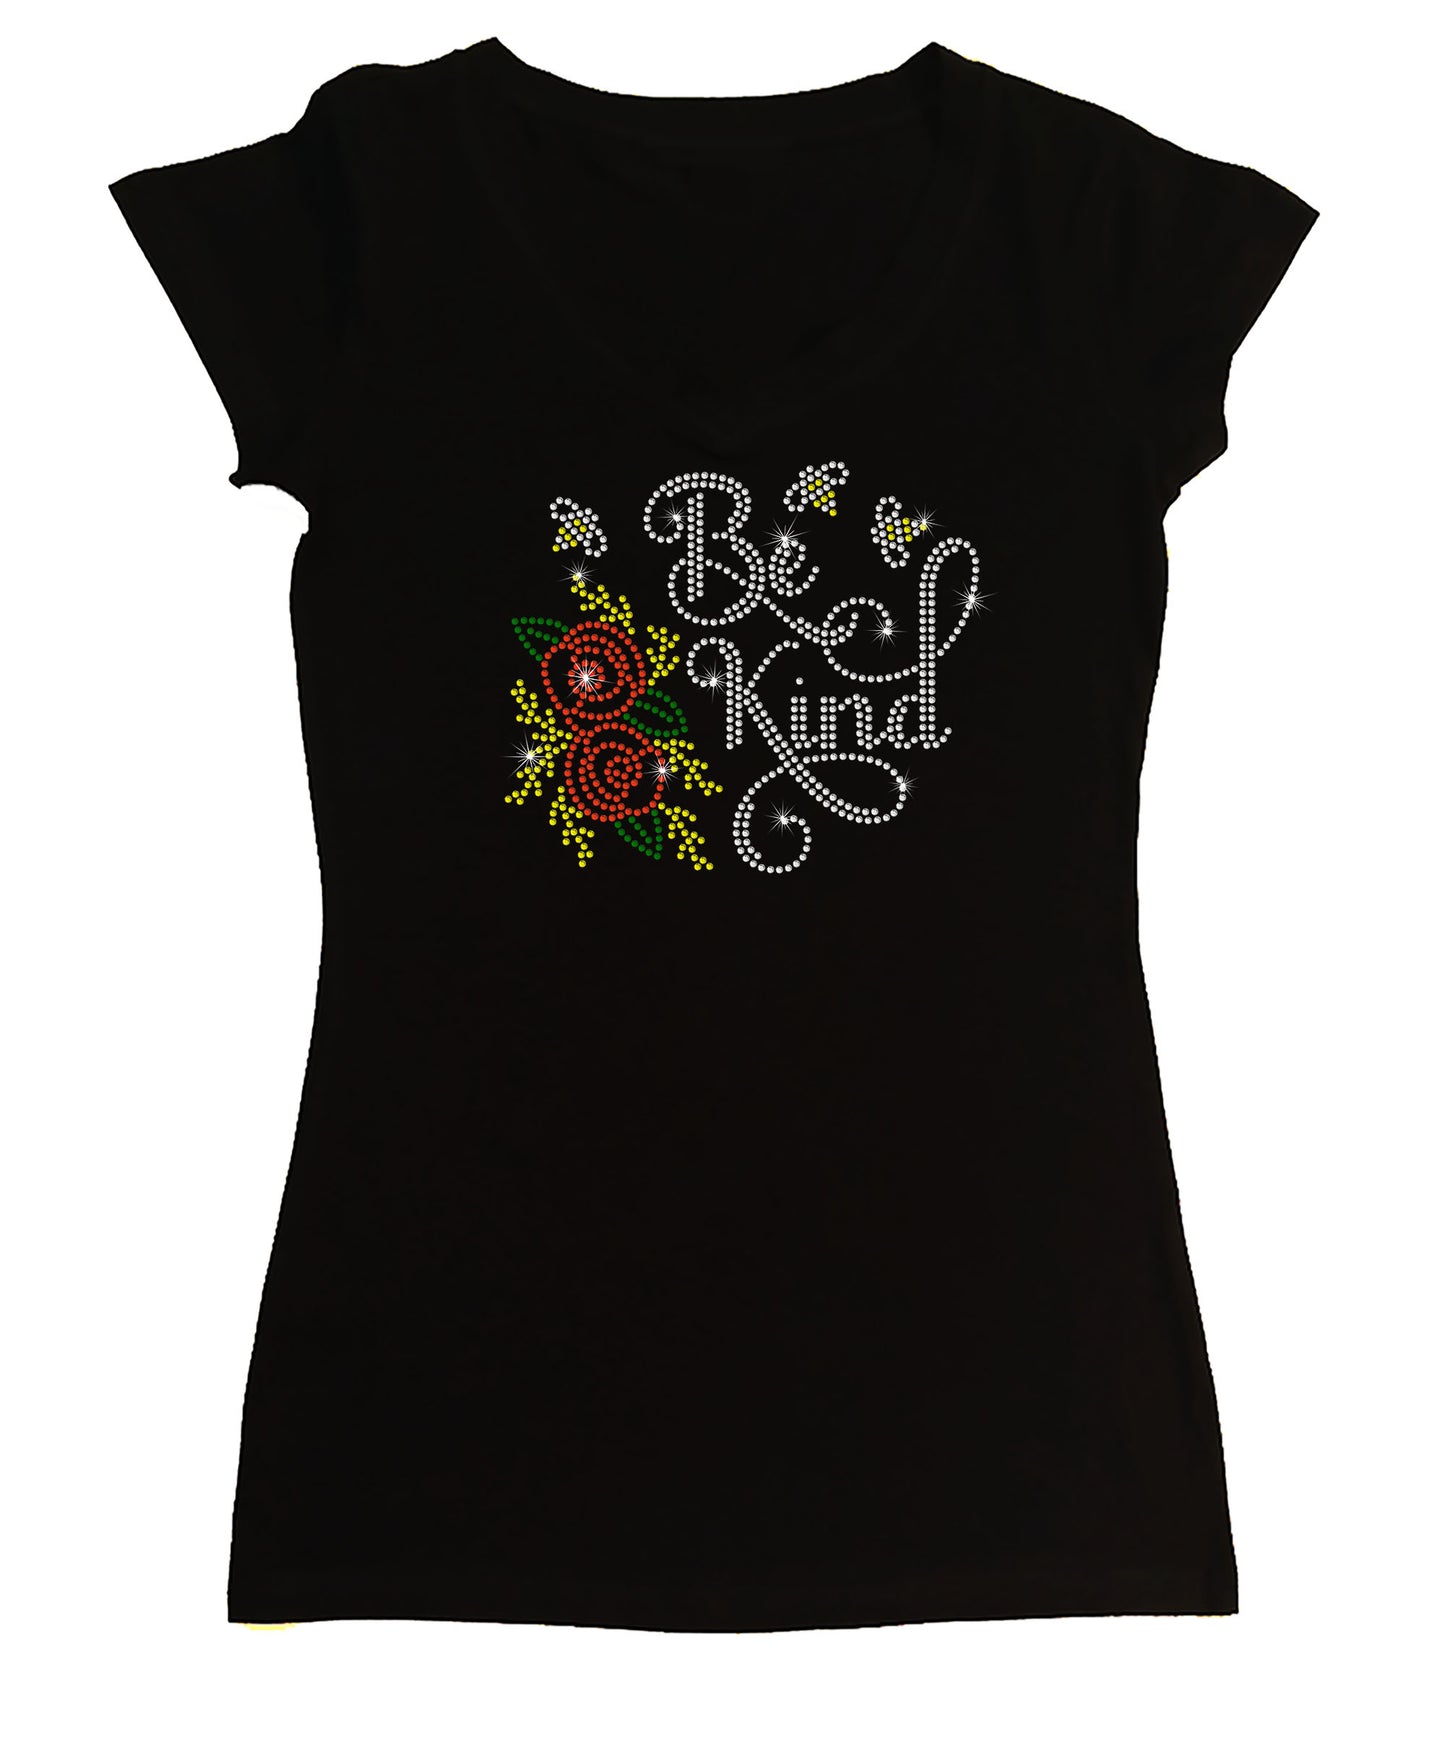 Women's Rhinestone Fitted Tight Snug Be Kind with Red Rose & Bees - Rhinestone Shirt